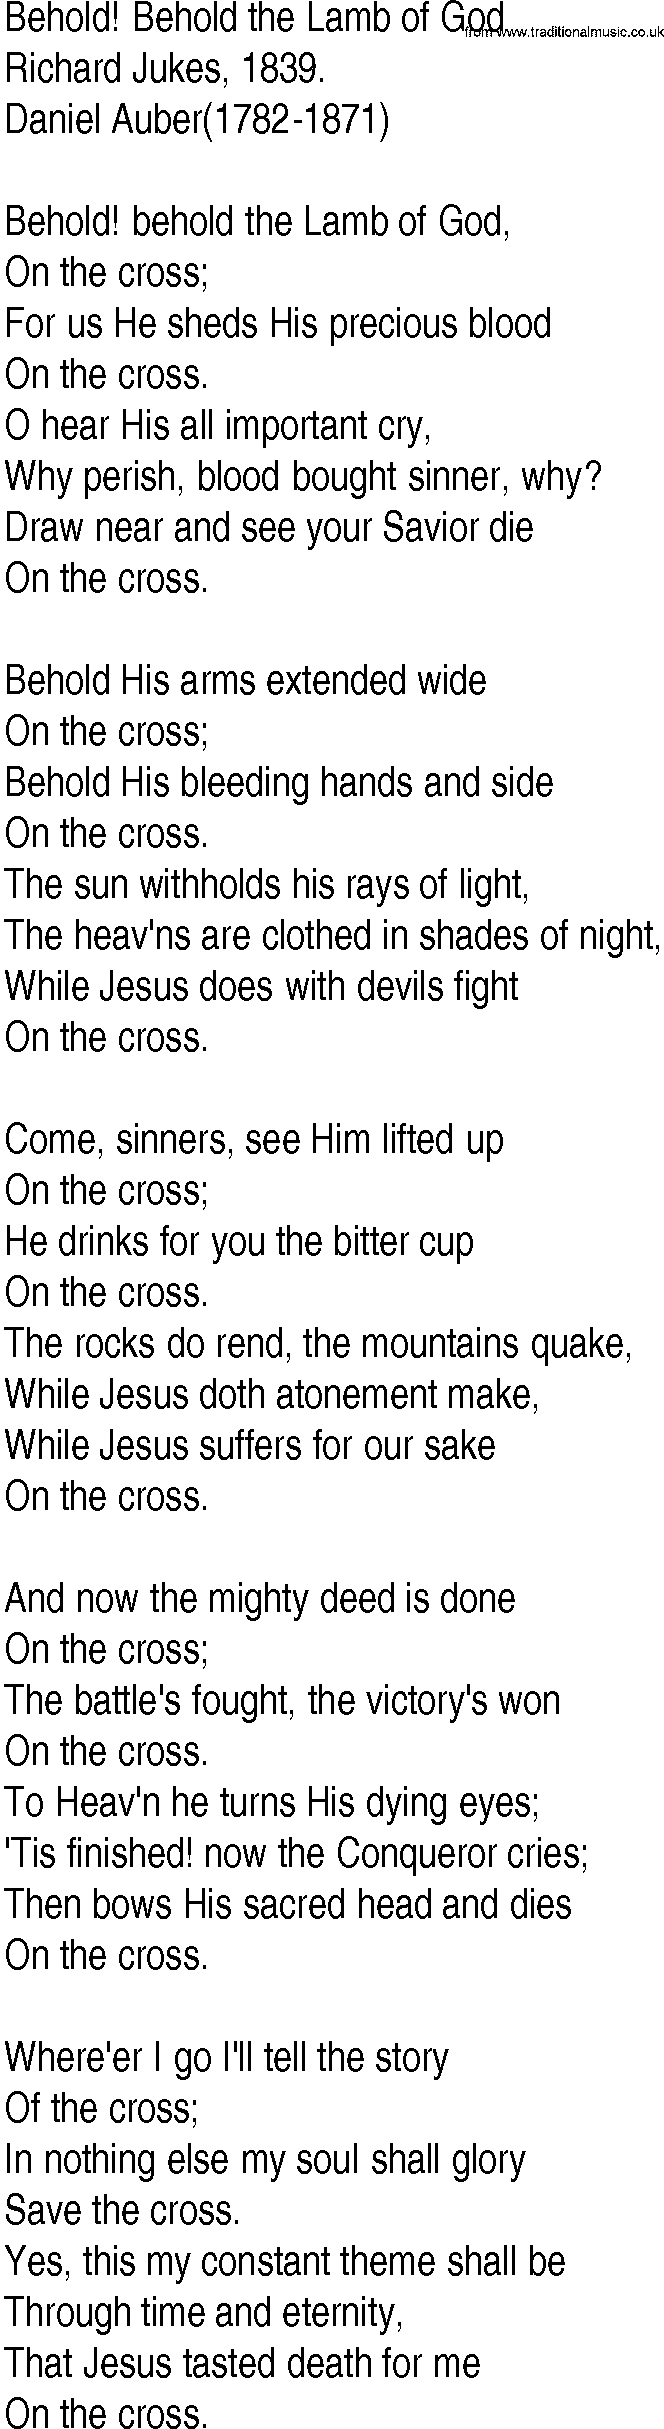 Hymn and Gospel Song: Behold! Behold the Lamb of God by Richard Jukes lyrics